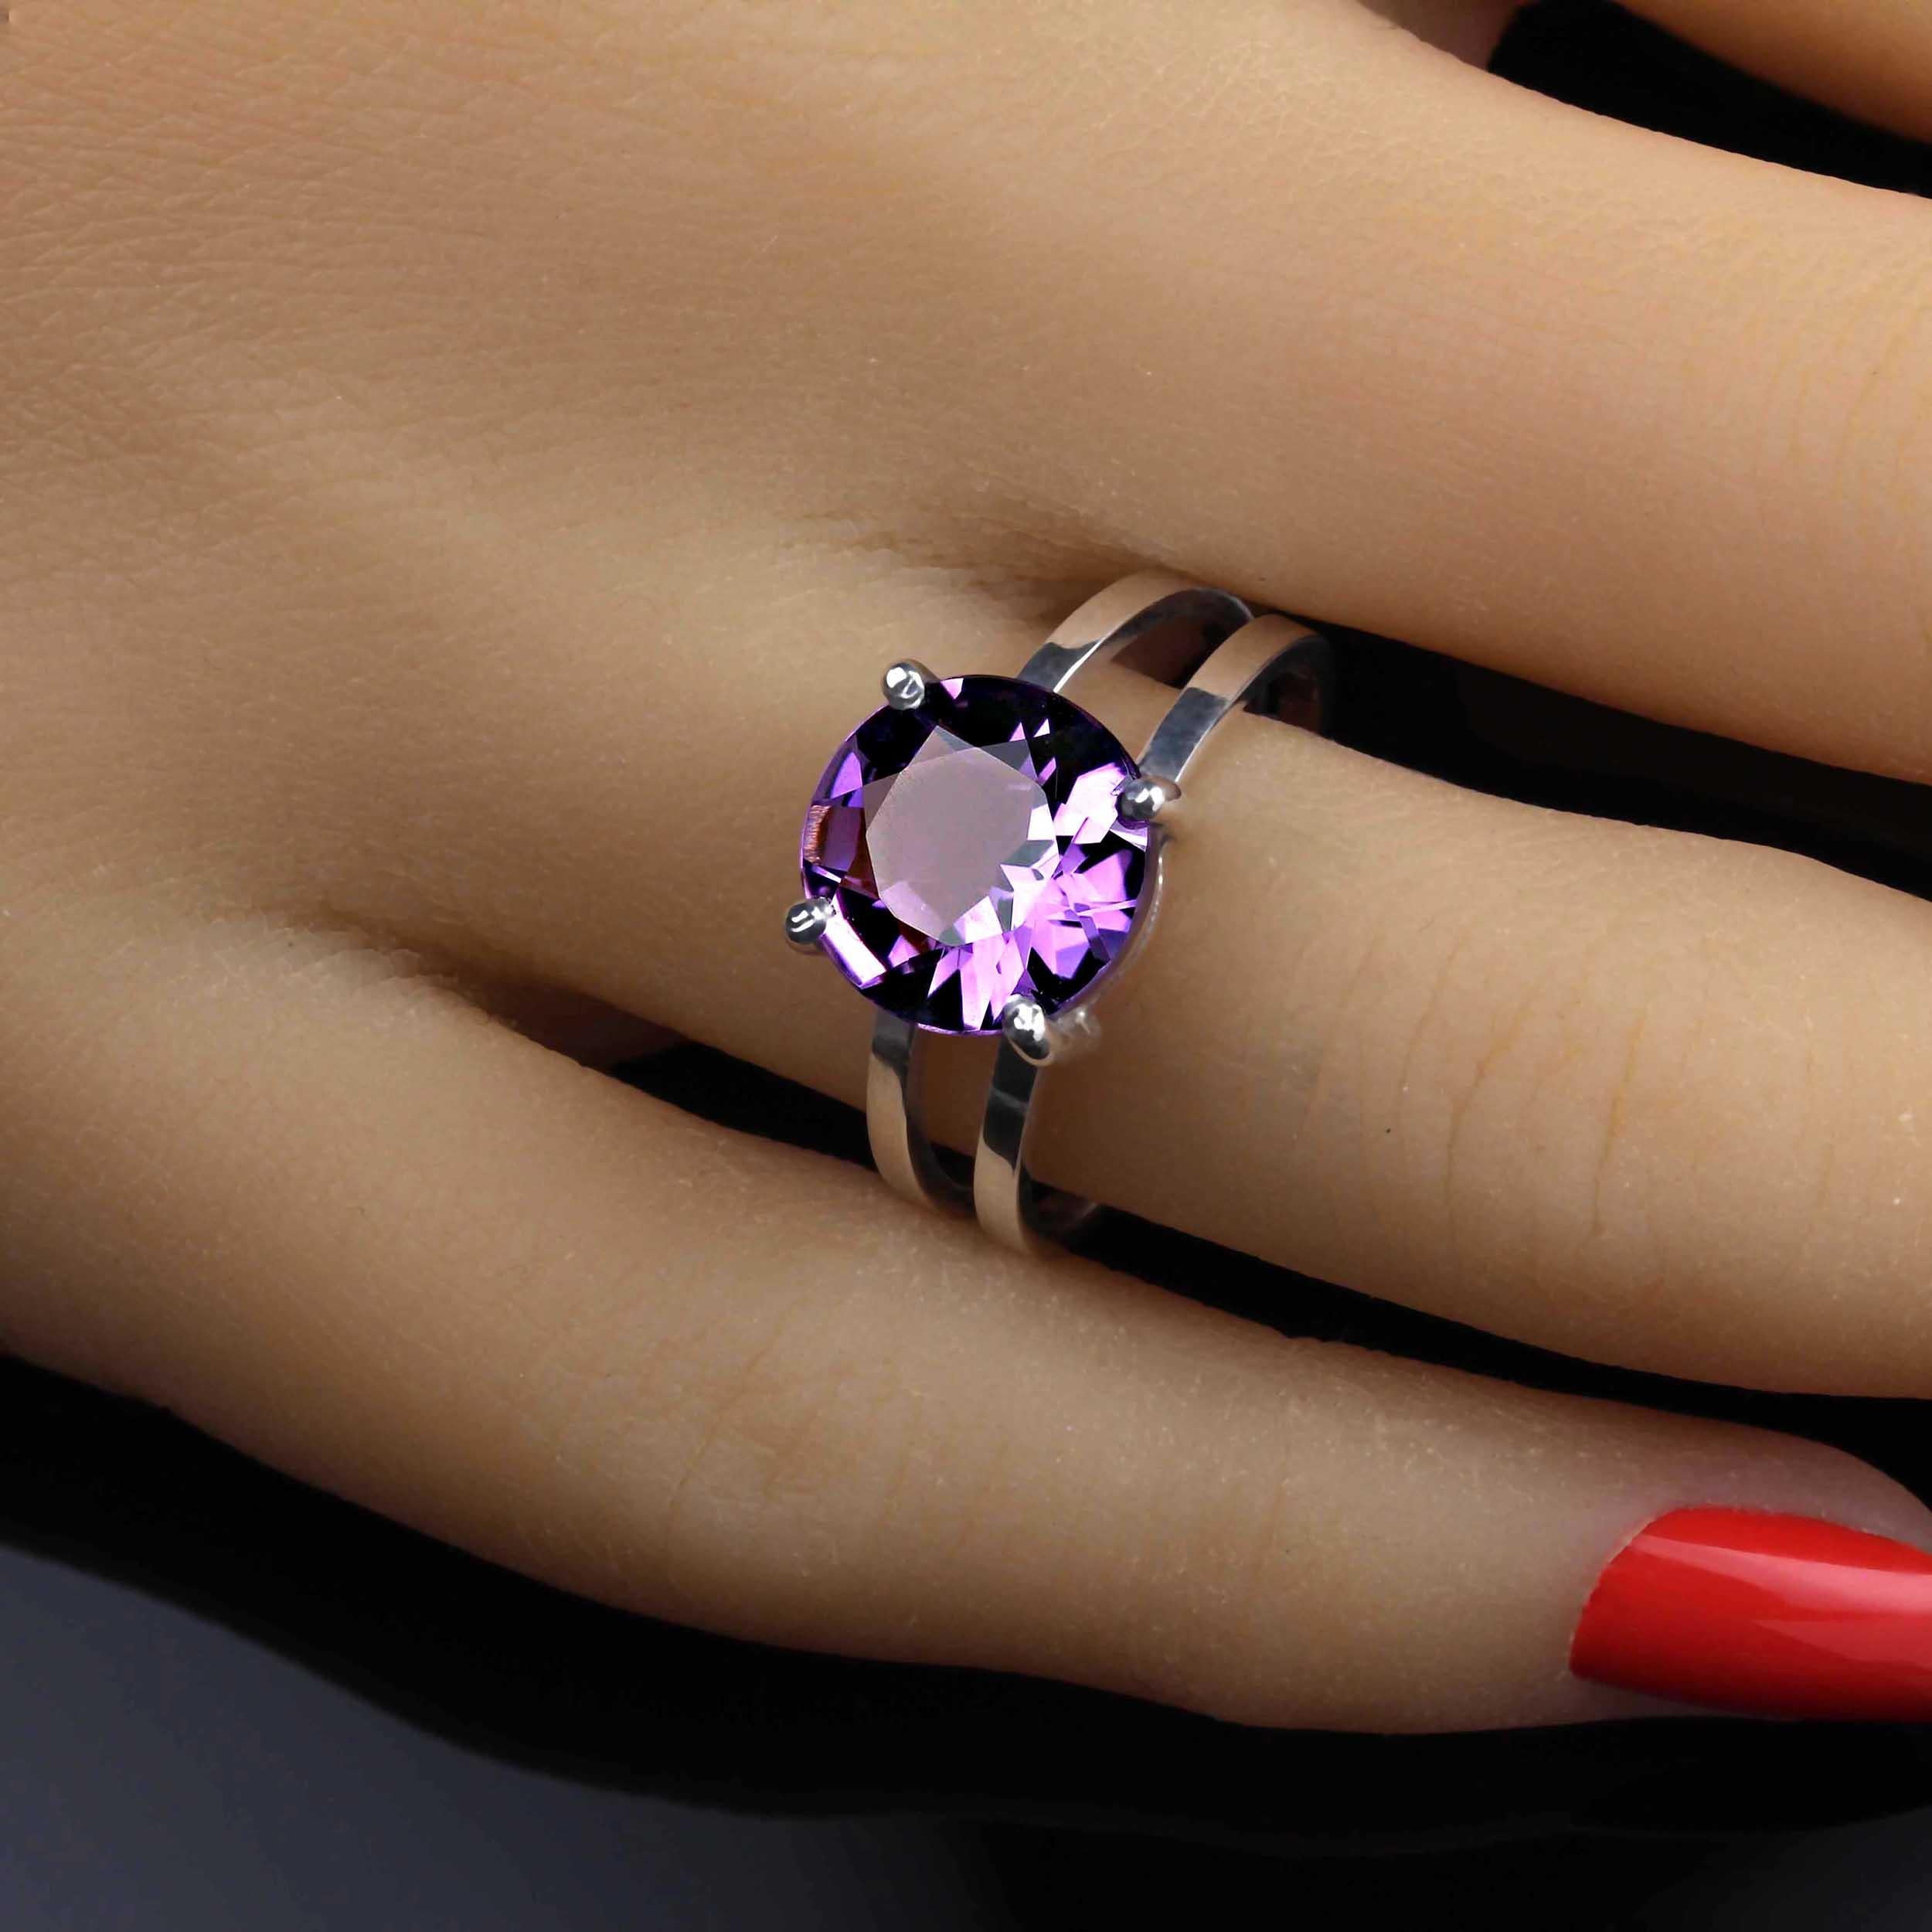 Unusual round 3.52Ct Amethyst set in a handmade Sterling Silver (2.88gms) setting. This lovely ring comes straight from our favorite vendor in Belo Horizonte, Minas Gerais, Brasil. We selected this unusual 10MM  round gemstone as the perfect size to